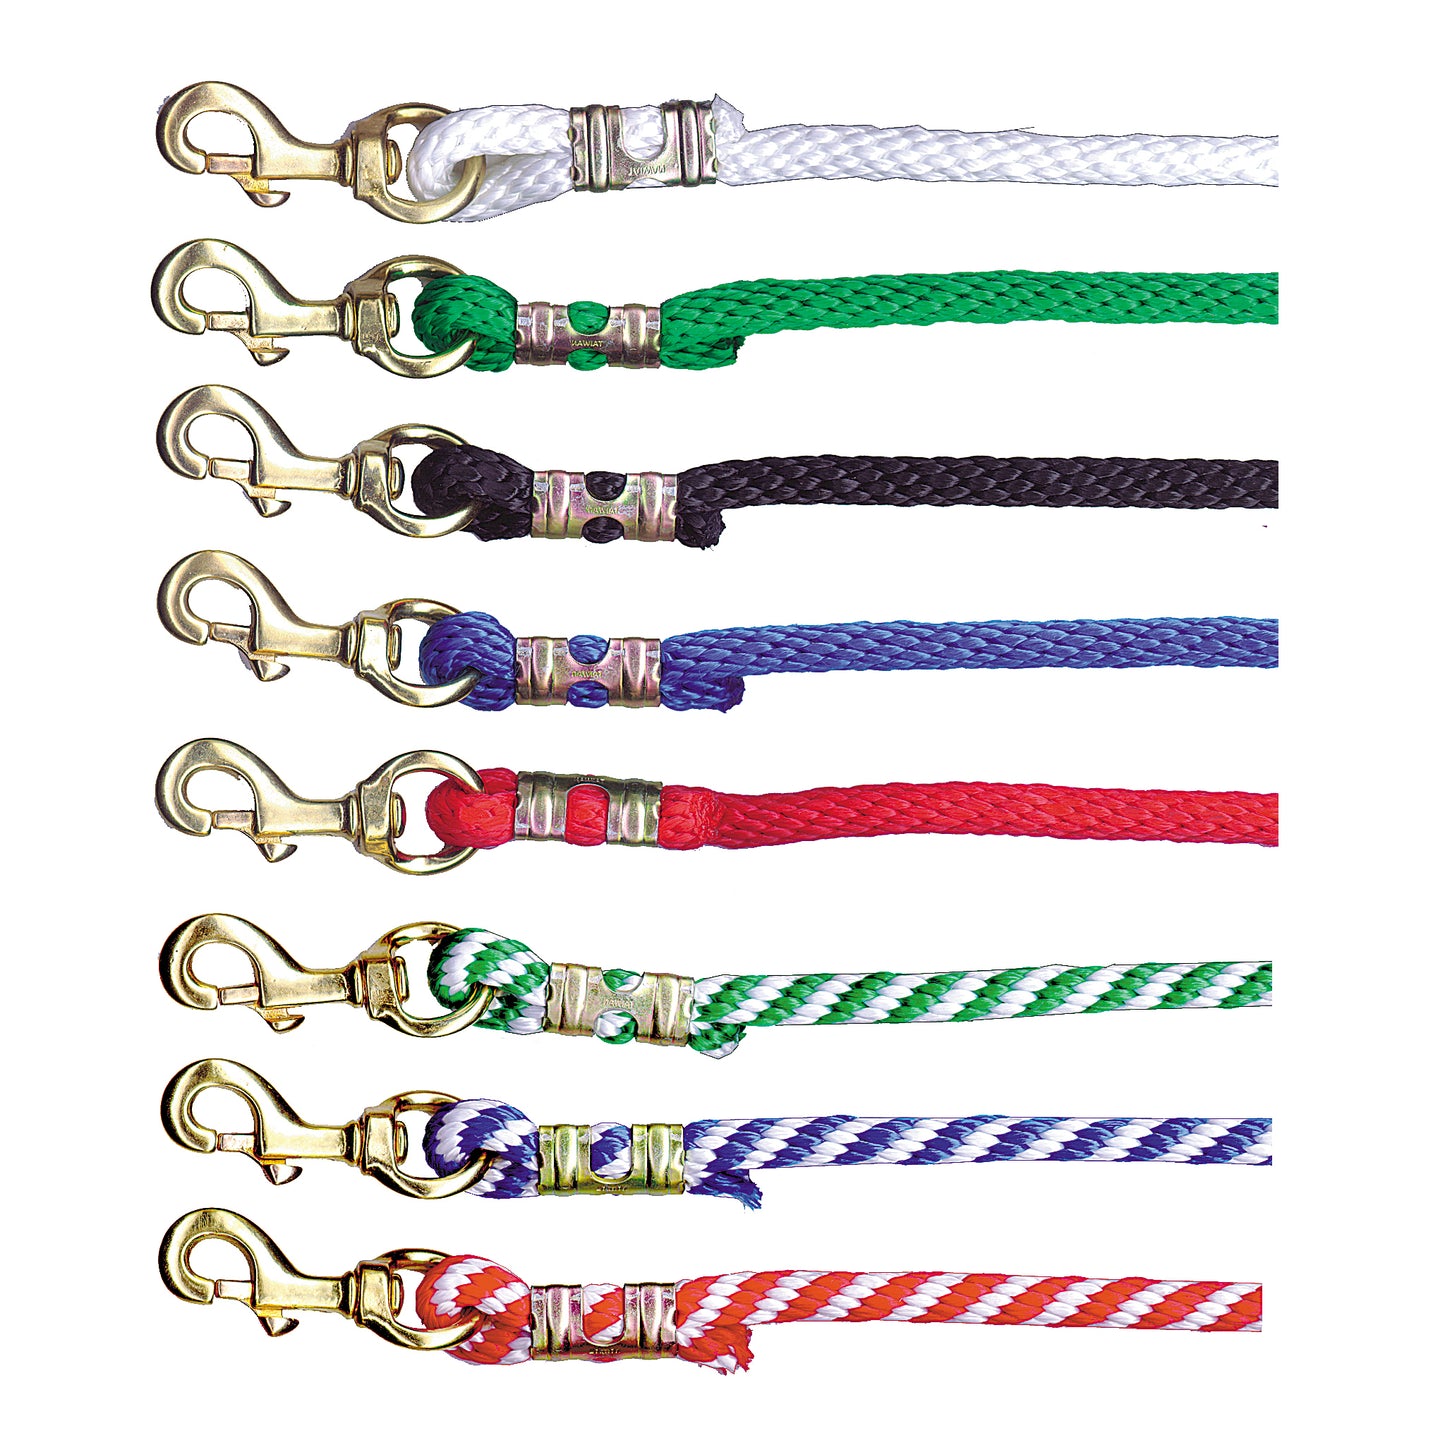 1/2" Thick Colored Poly Leads